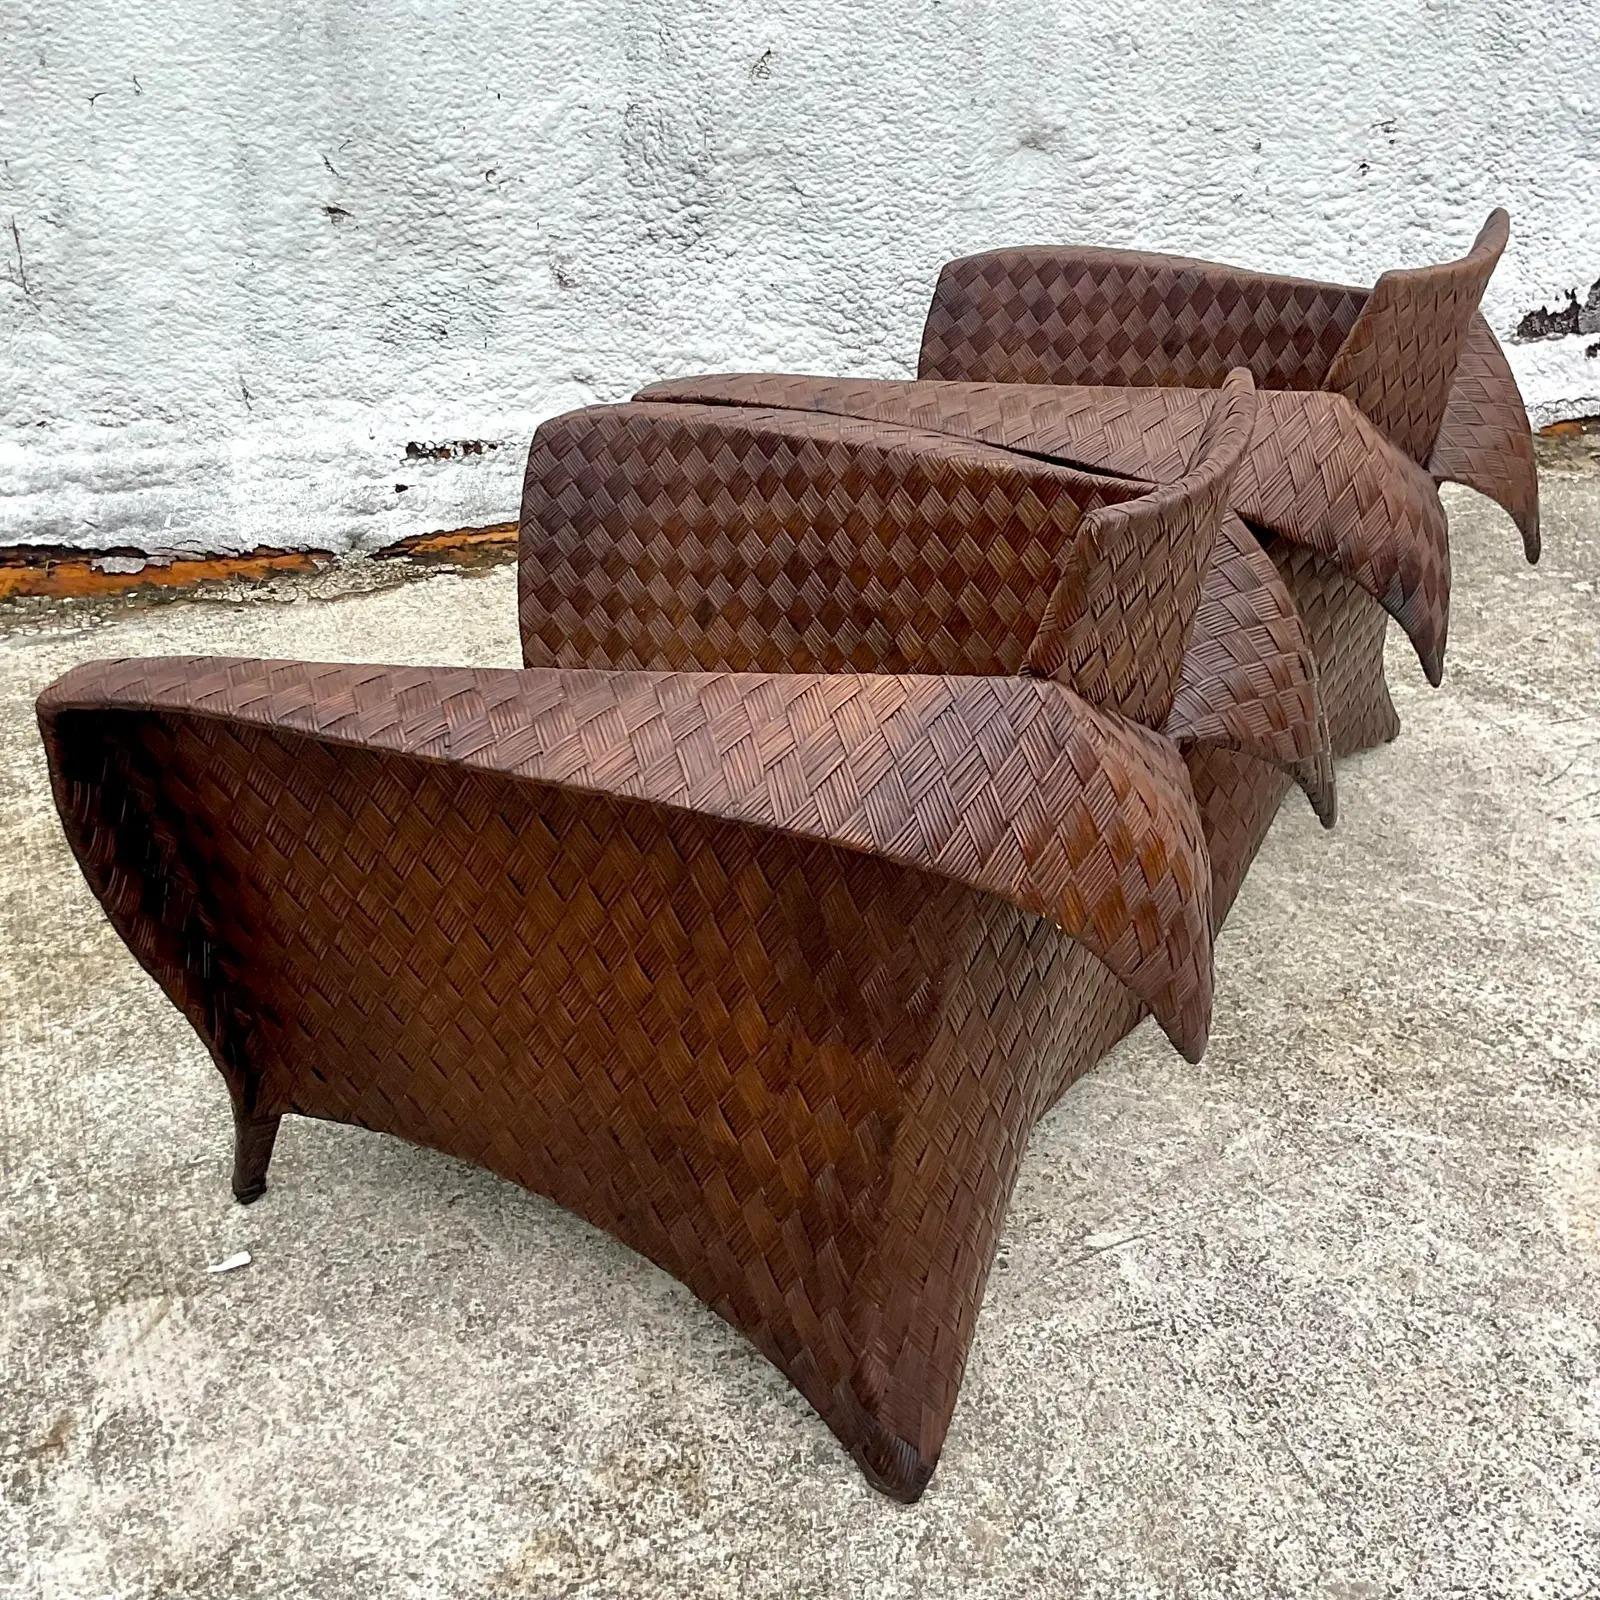 A fantastic vintage pair of Coastal lounge chairs. Made by the iconic Lane Furniture group. Part of their contemporary Ventures division. Beautiful sculptural shape in the manner of Origami. Acquired from a Palm Beach estate.